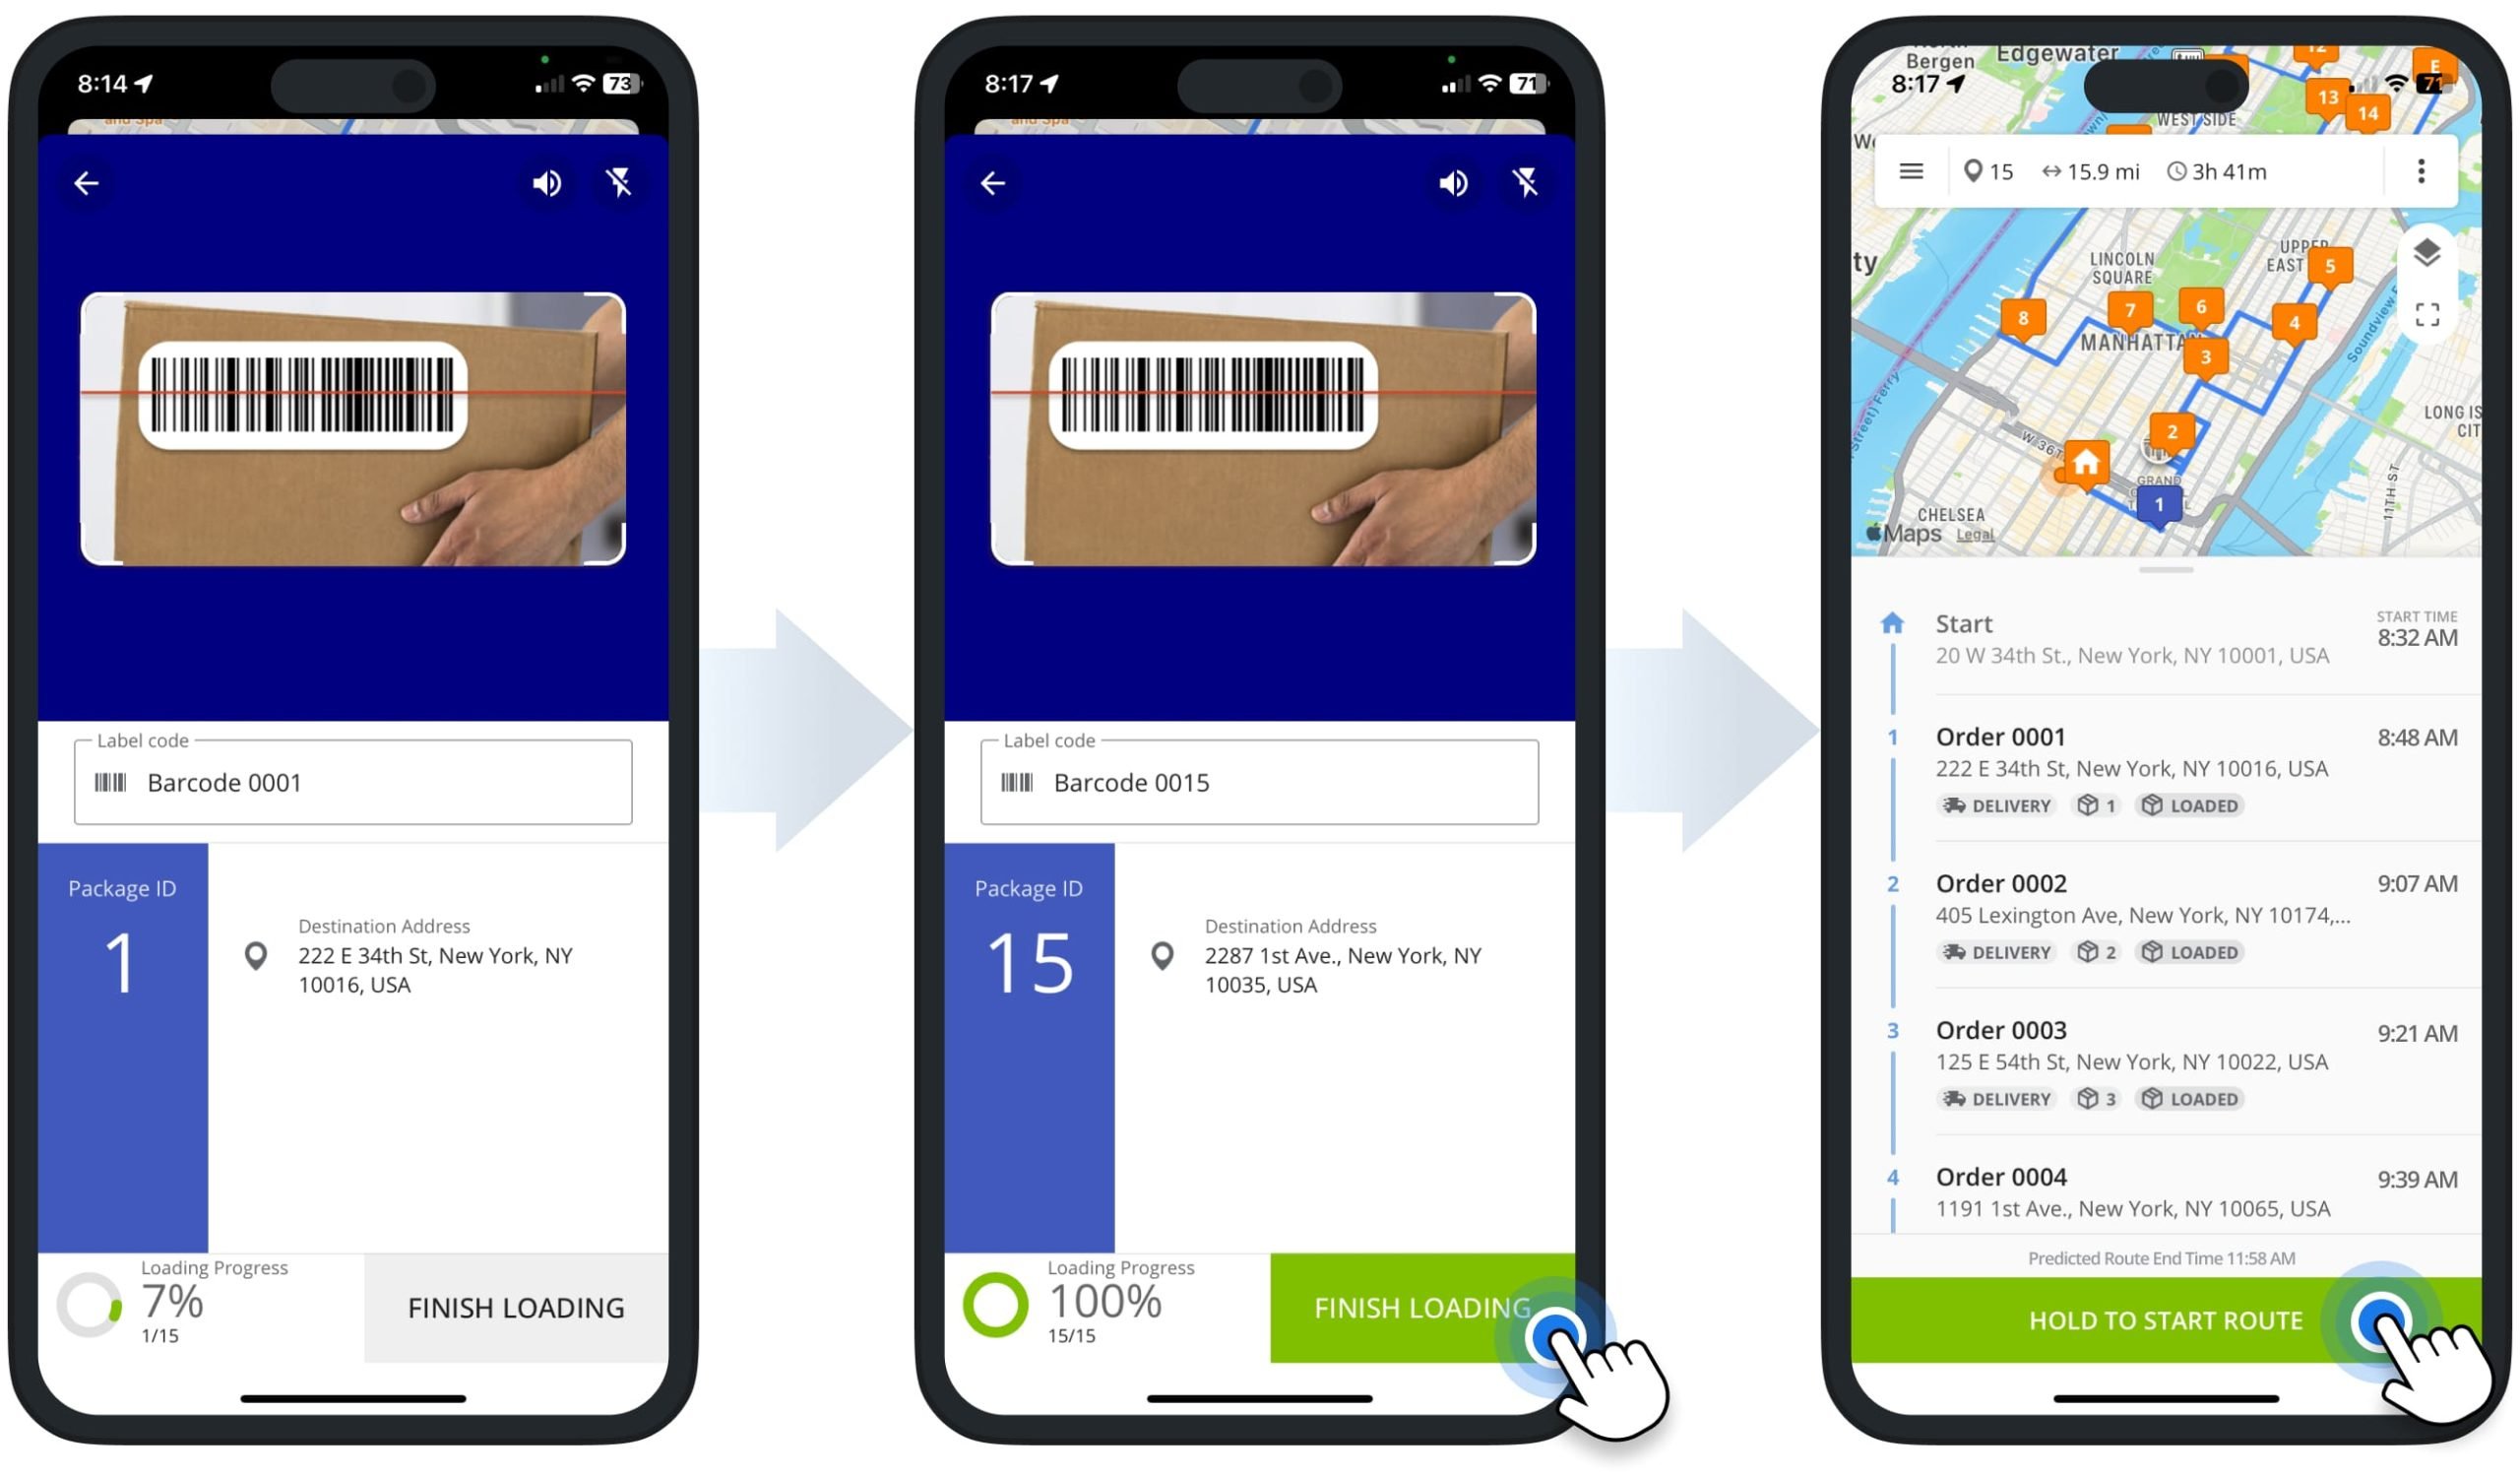 After routing, you can use the same Route4Me App to scan and confirm orders with the in-app barcode label scanner, navigate routes, unload orders, and collect proof of delivery or service.